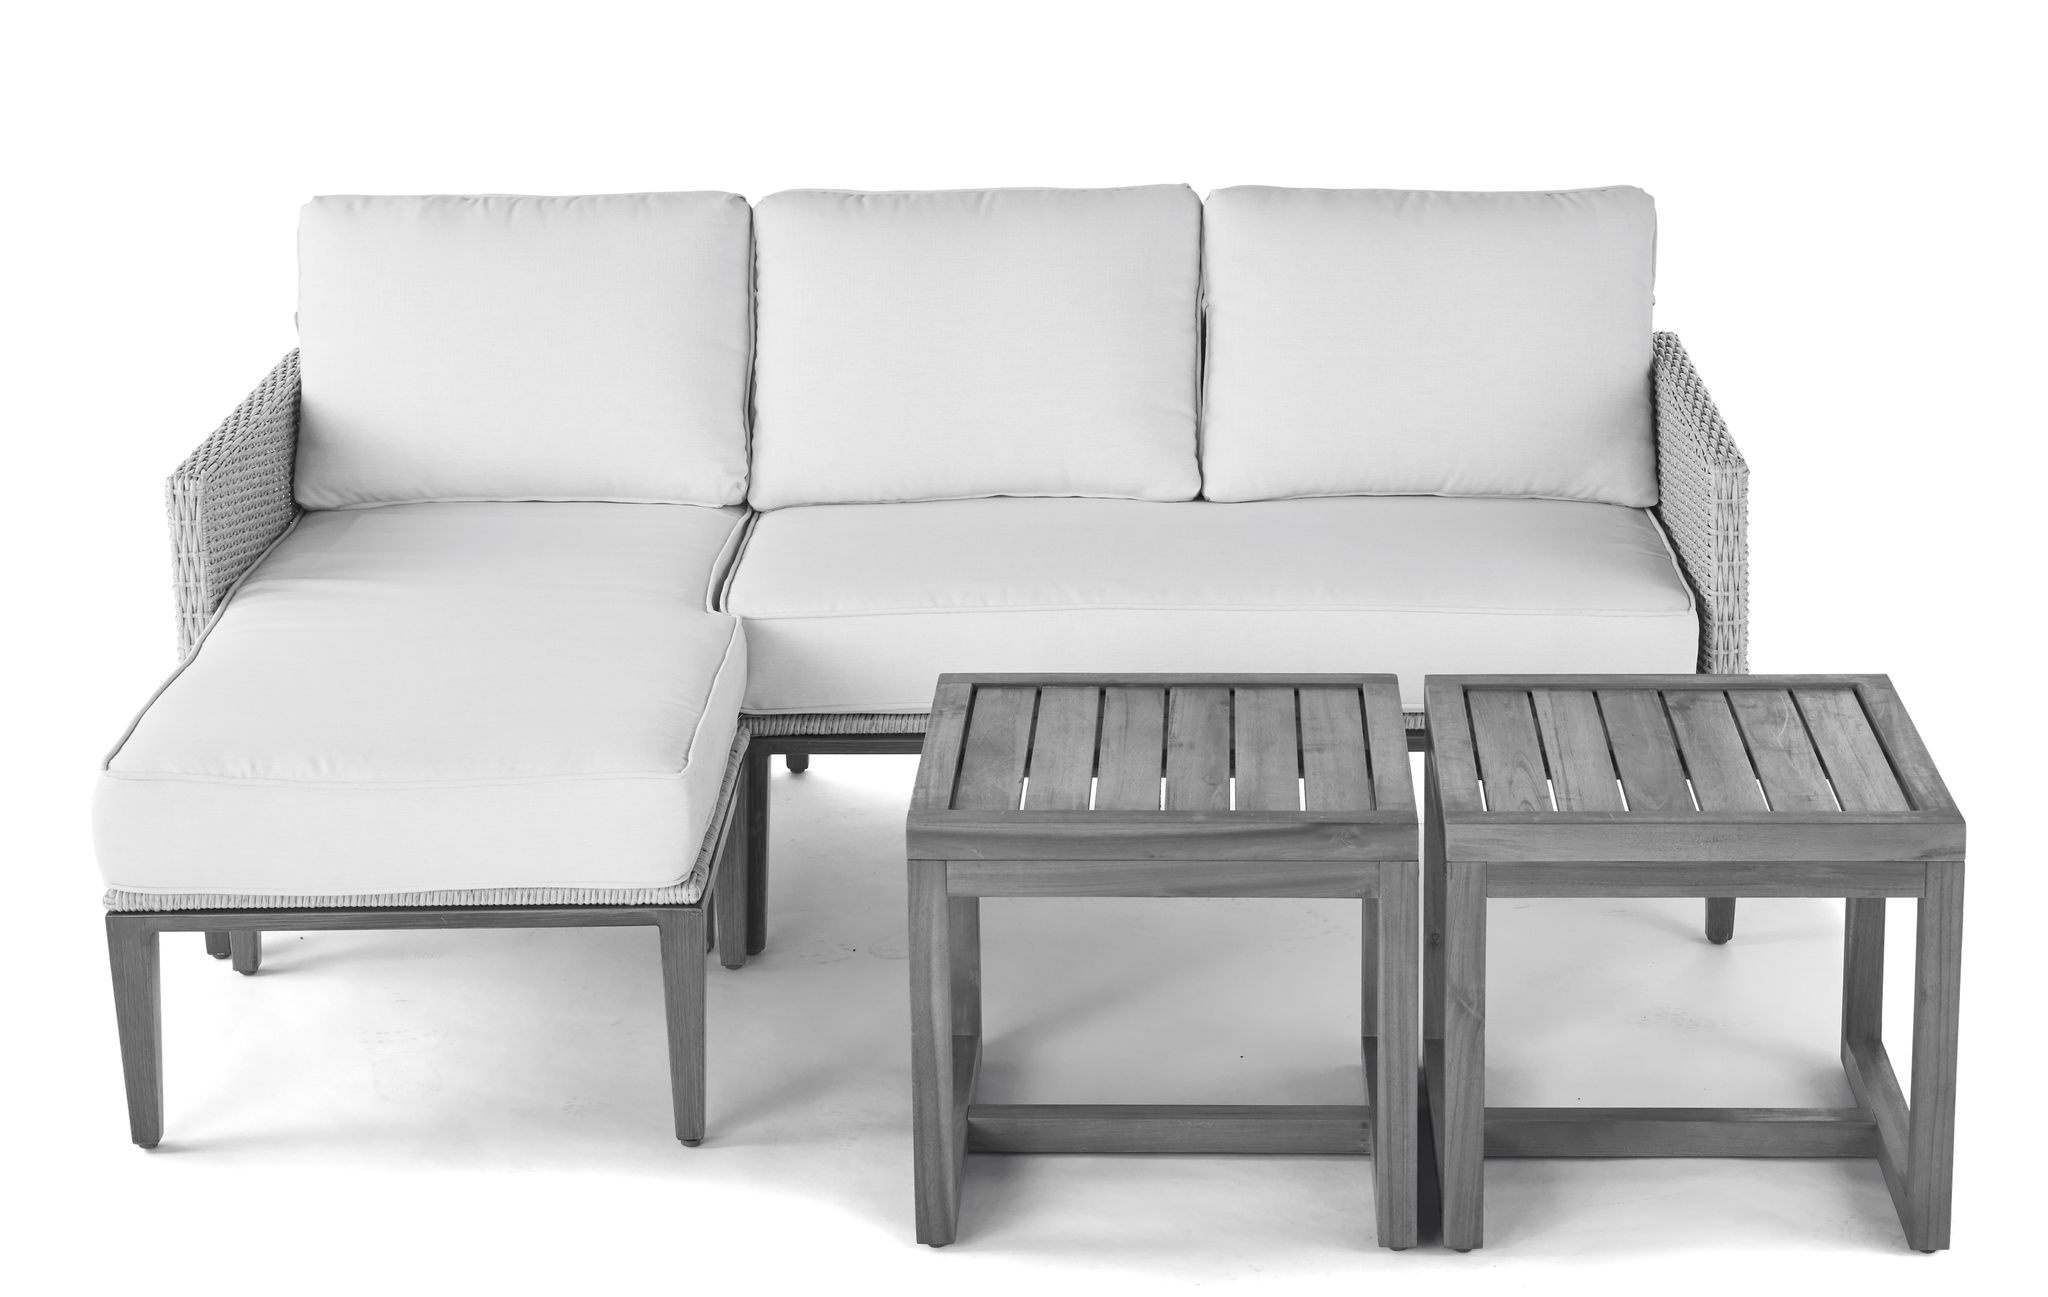 Better Homes & Gardens Davenport Sofa Lounger with Two Acacia Wood Table with Cushions - White - image 5 of 11